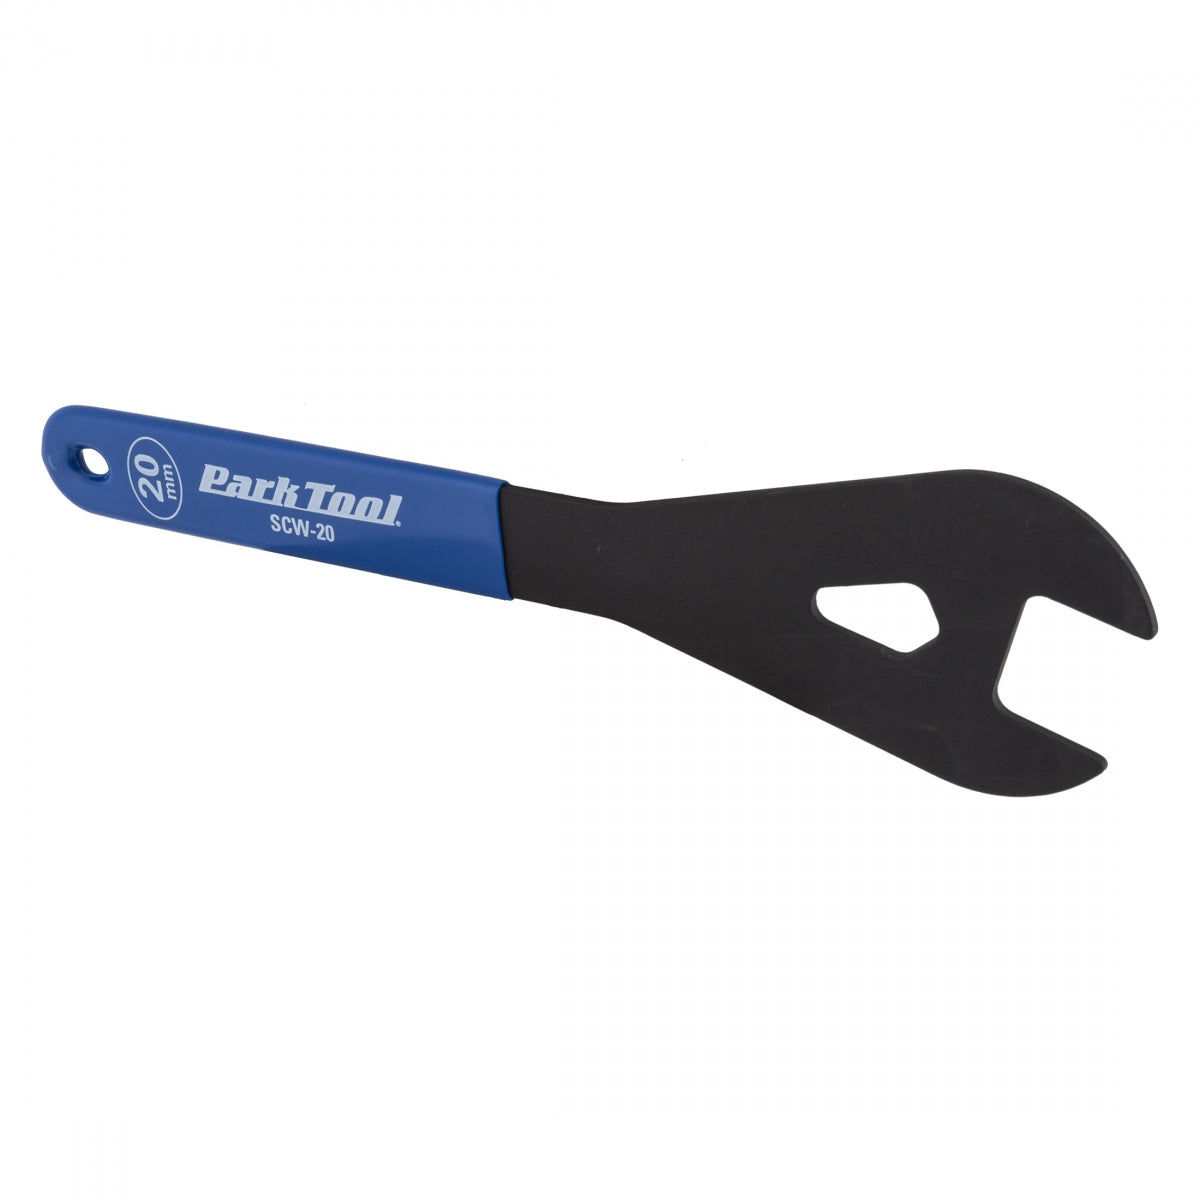 Park Tool #SW-20 Master Spoke Wrench, 0.127", Silver